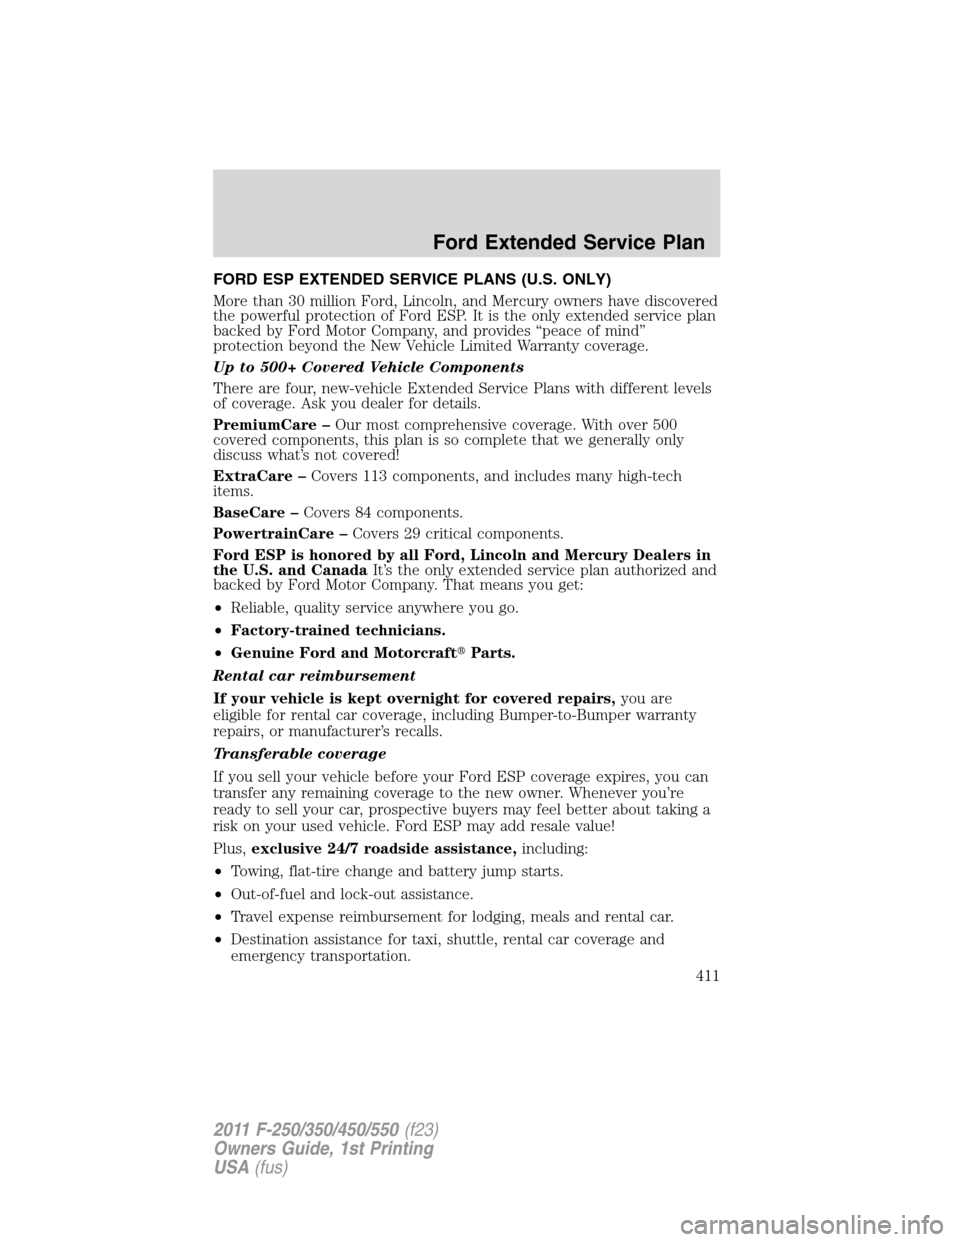 FORD SUPER DUTY 2011 3.G Owners Guide FORD ESP EXTENDED SERVICE PLANS (U.S. ONLY)
More than 30 million Ford, Lincoln, and Mercury owners have discovered
the powerful protection of Ford ESP. It is the only extended service plan
backed by F